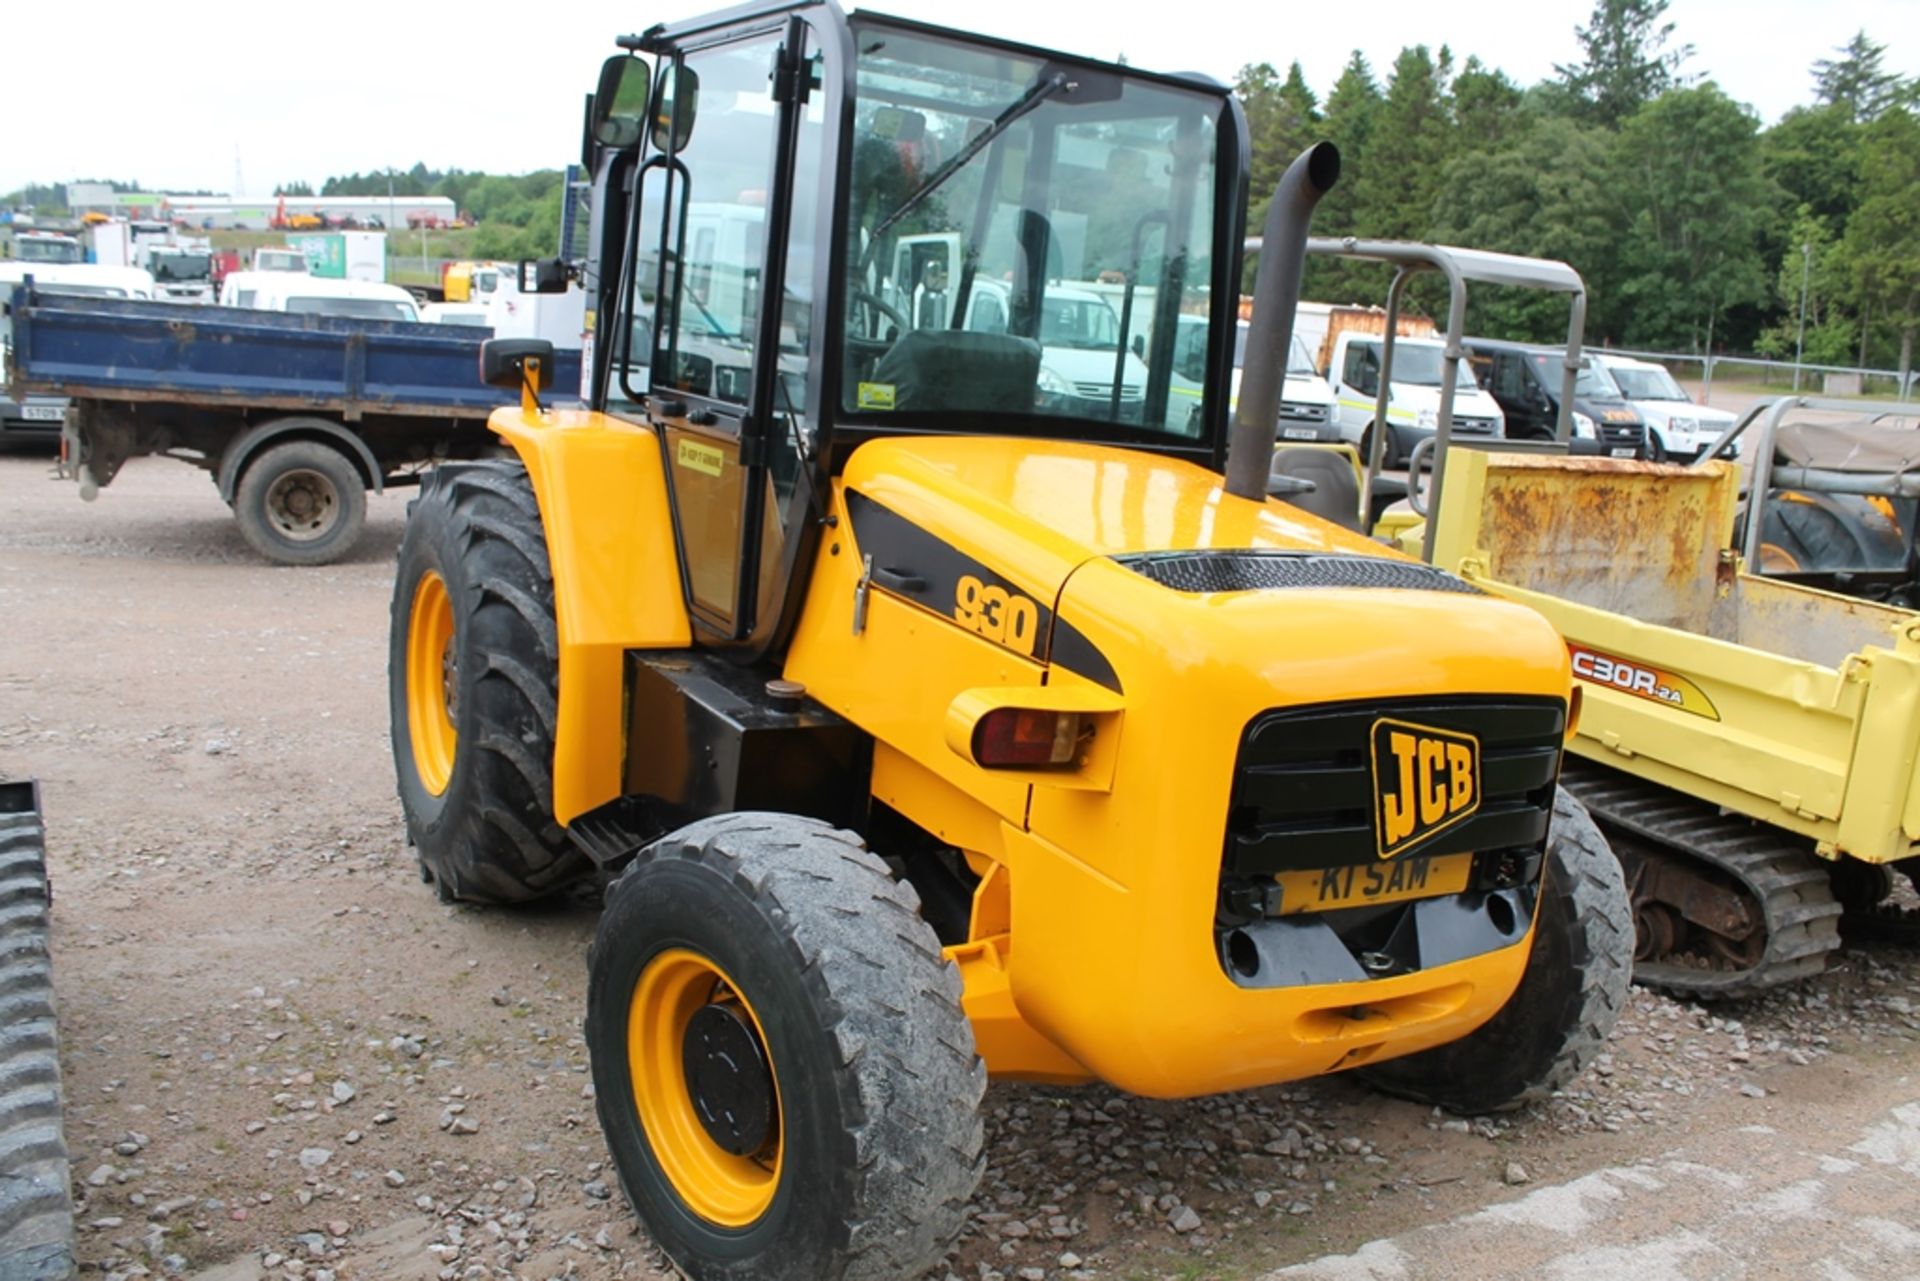 K1 SAM, , JCB 930 4WD, , 18, 143 HOURS - UNCHECKED, , YEAR 2003, , PLUS VAT, - Image 2 of 5